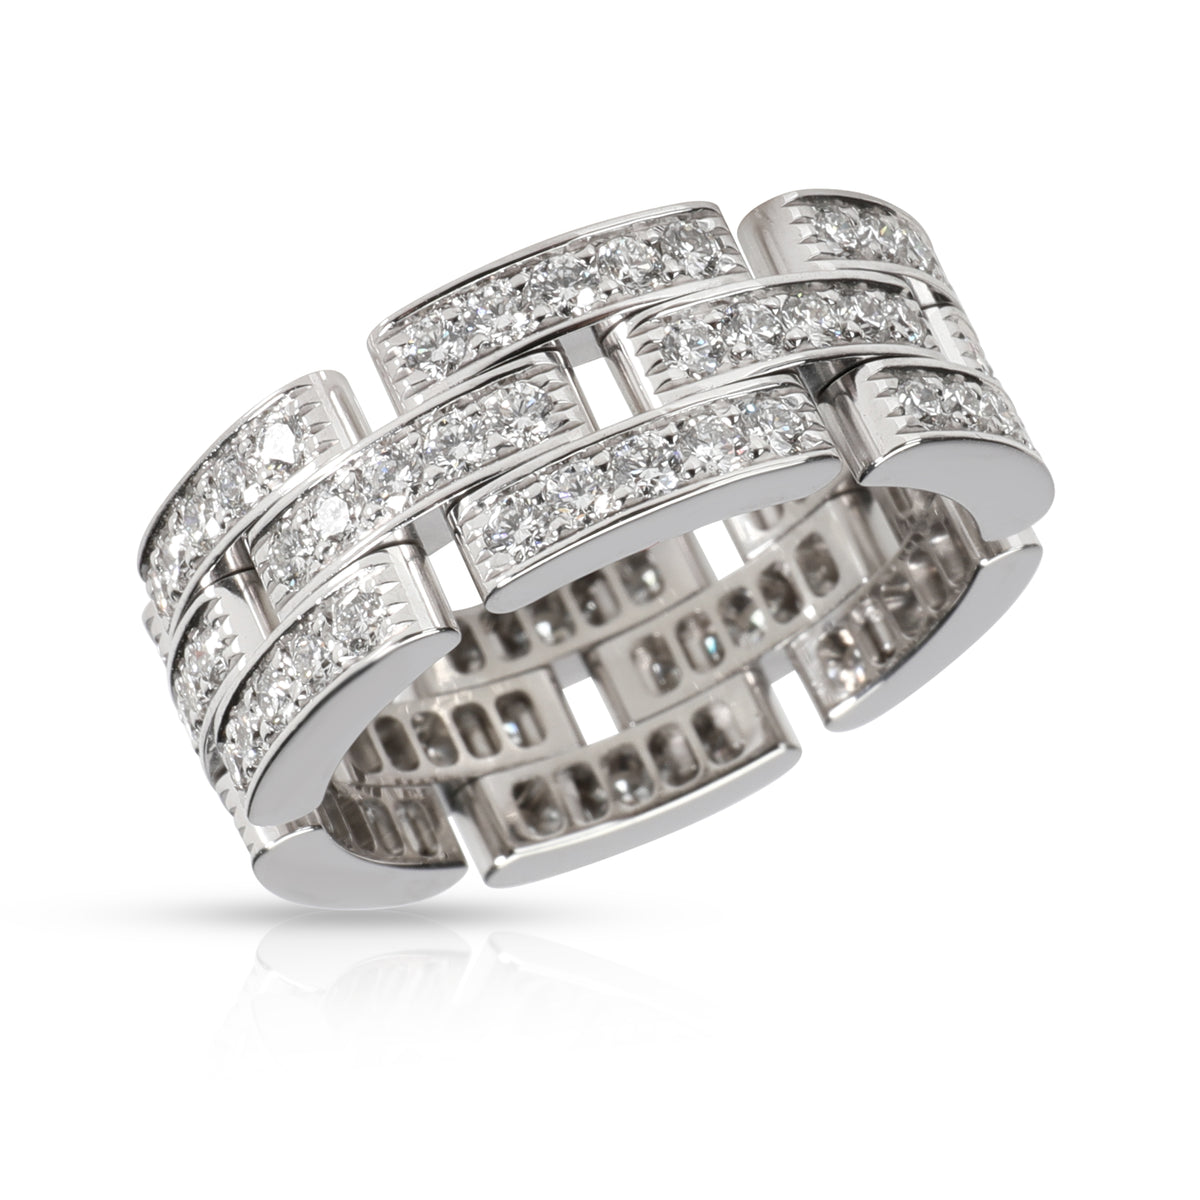 Cartier Maillon Panthere Diamond Ring in 18K White Gold 1.8 CTW